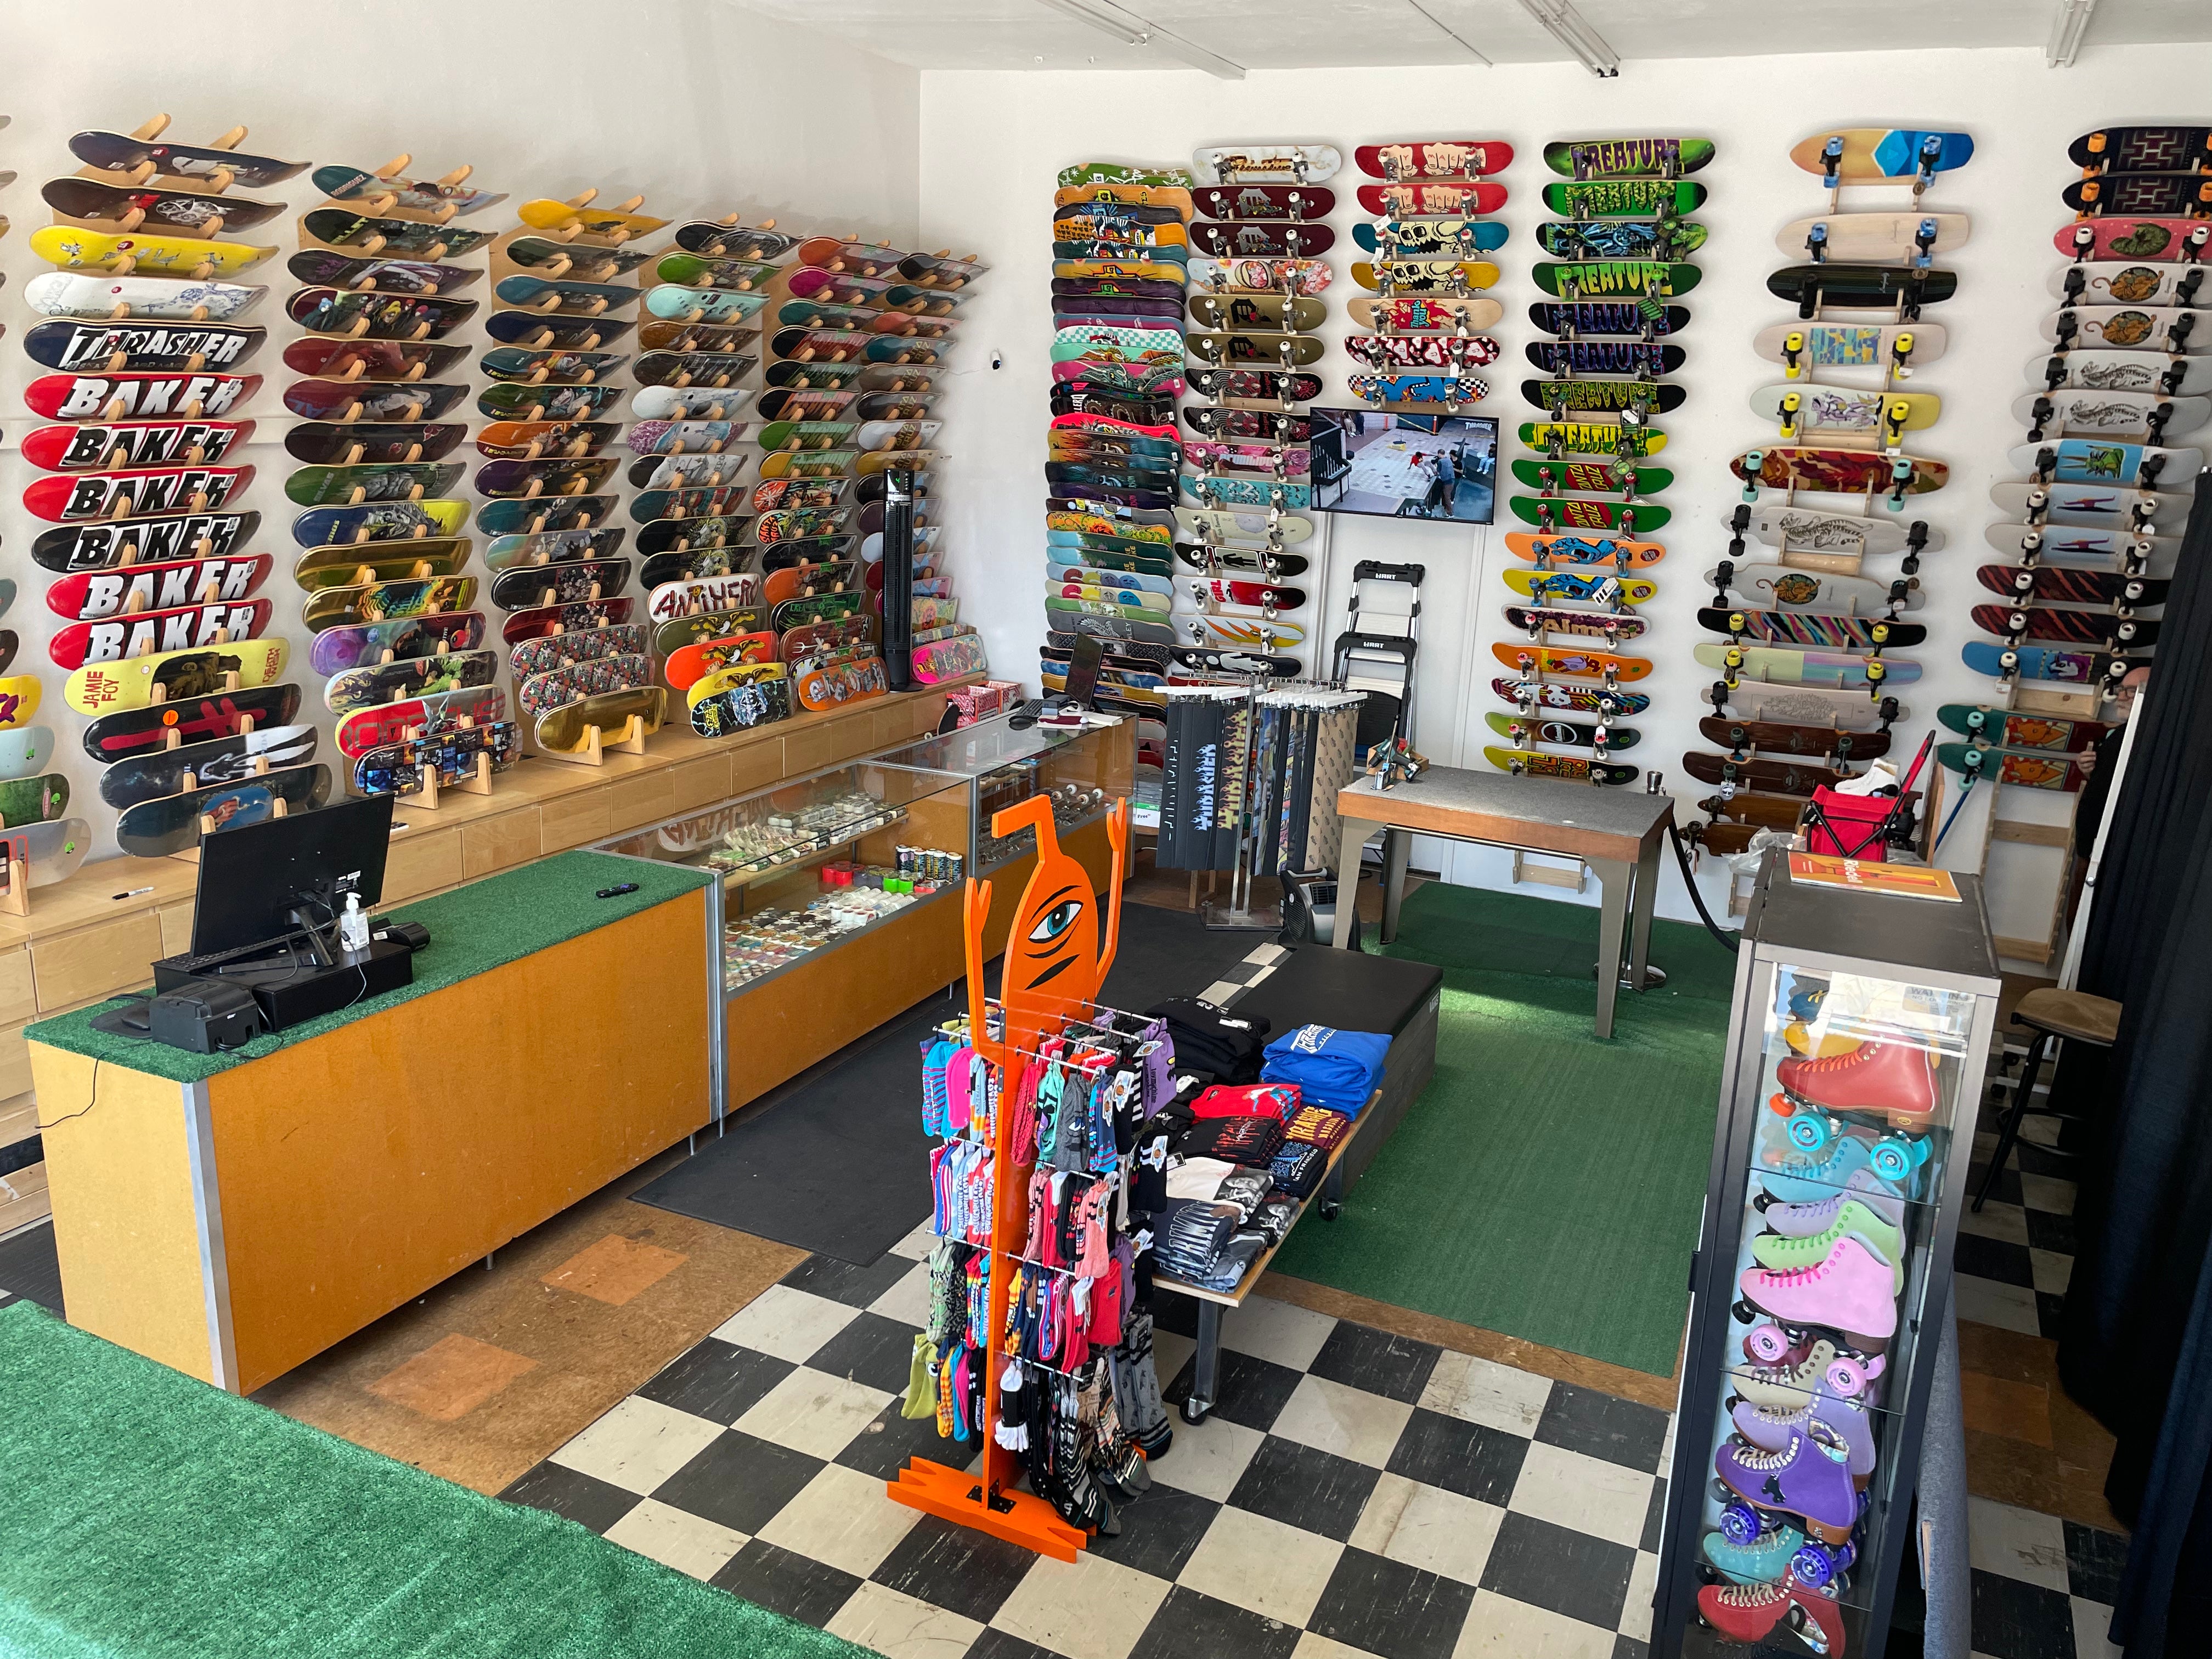 Surf & Skate Brands: Clothing, Shoes & Accessories